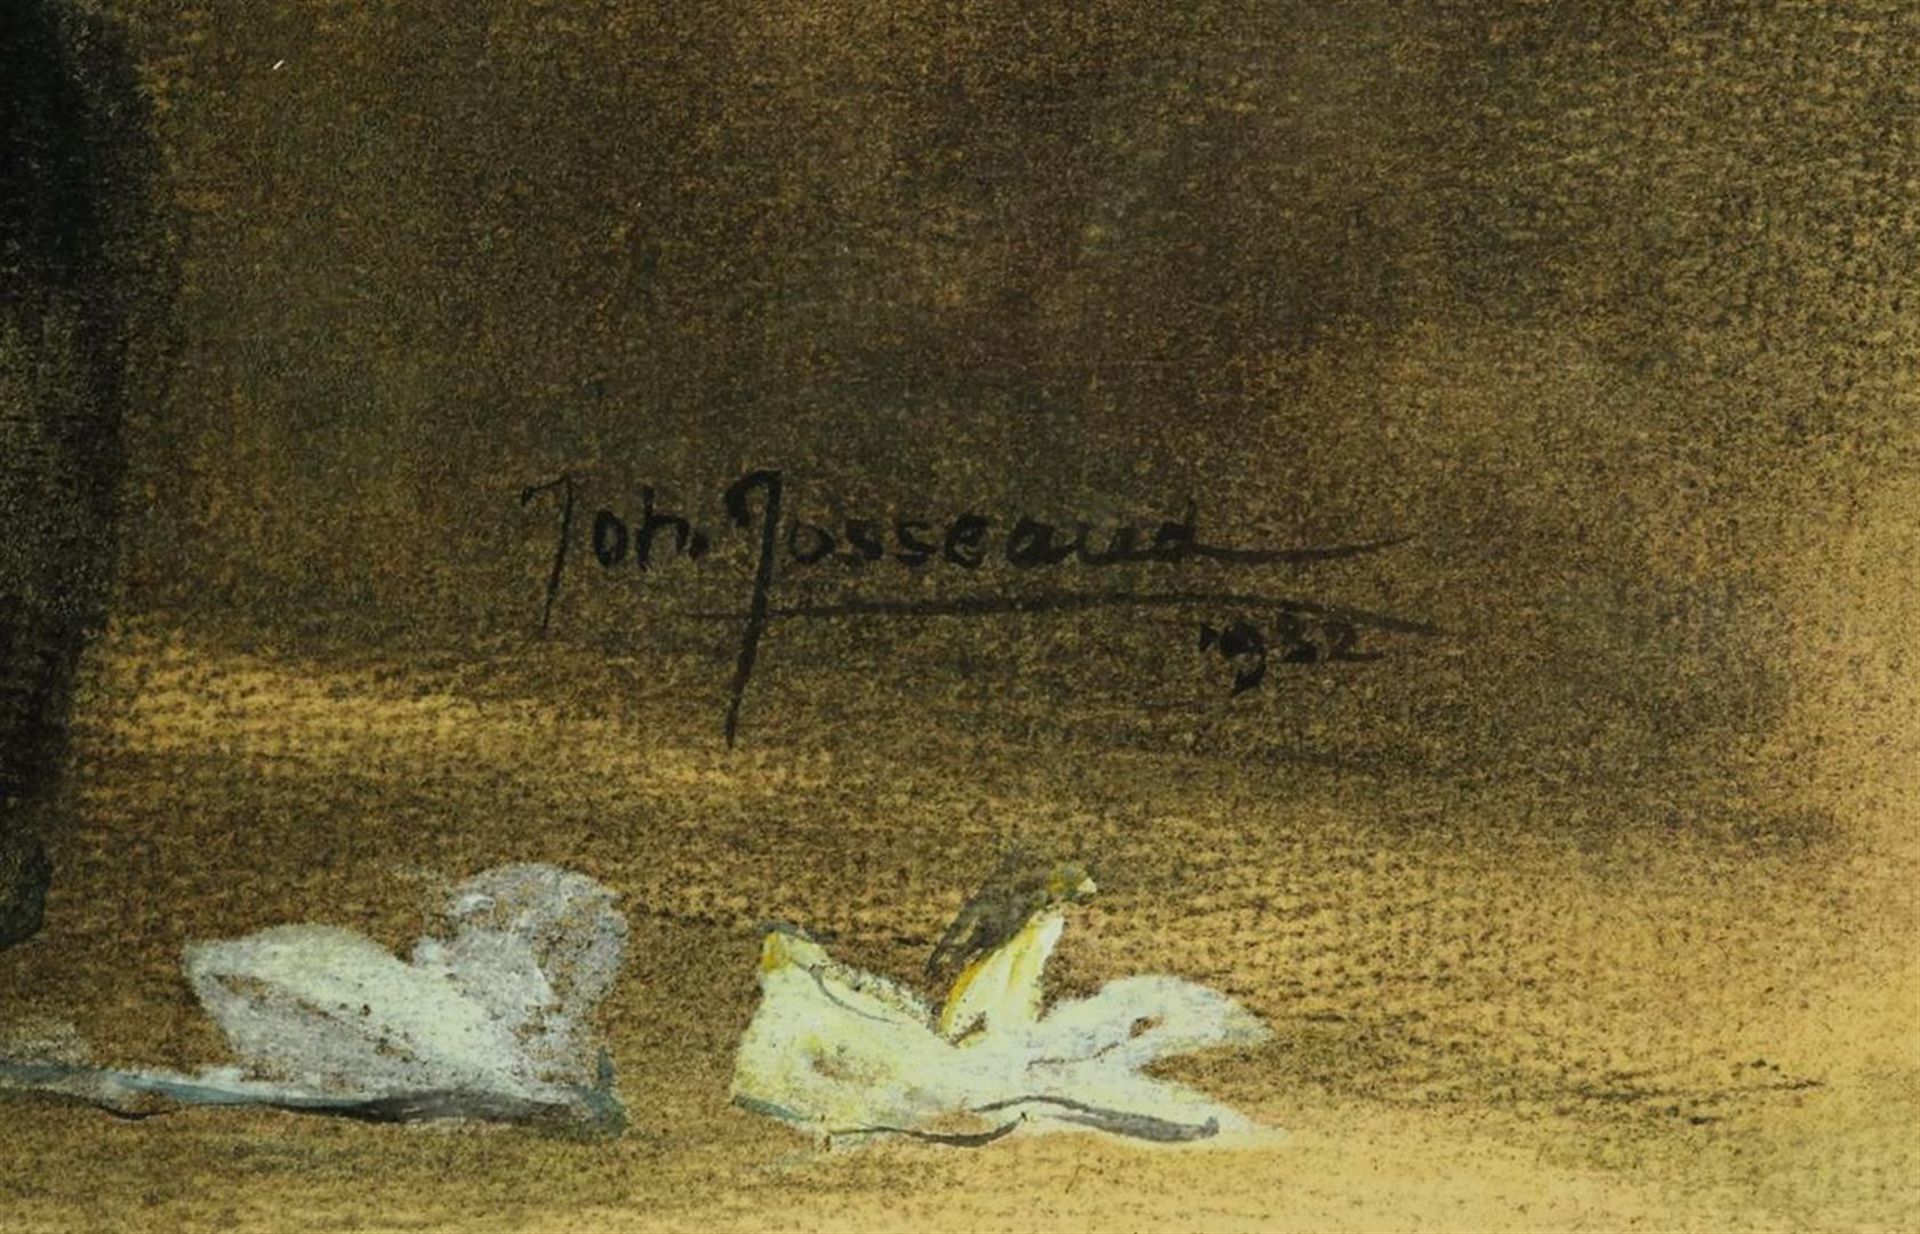 Johannes Josseaud (1880-1935) Flower still life, signed and dated 1932 lower right, pastel 30 x 45 - Image 4 of 4